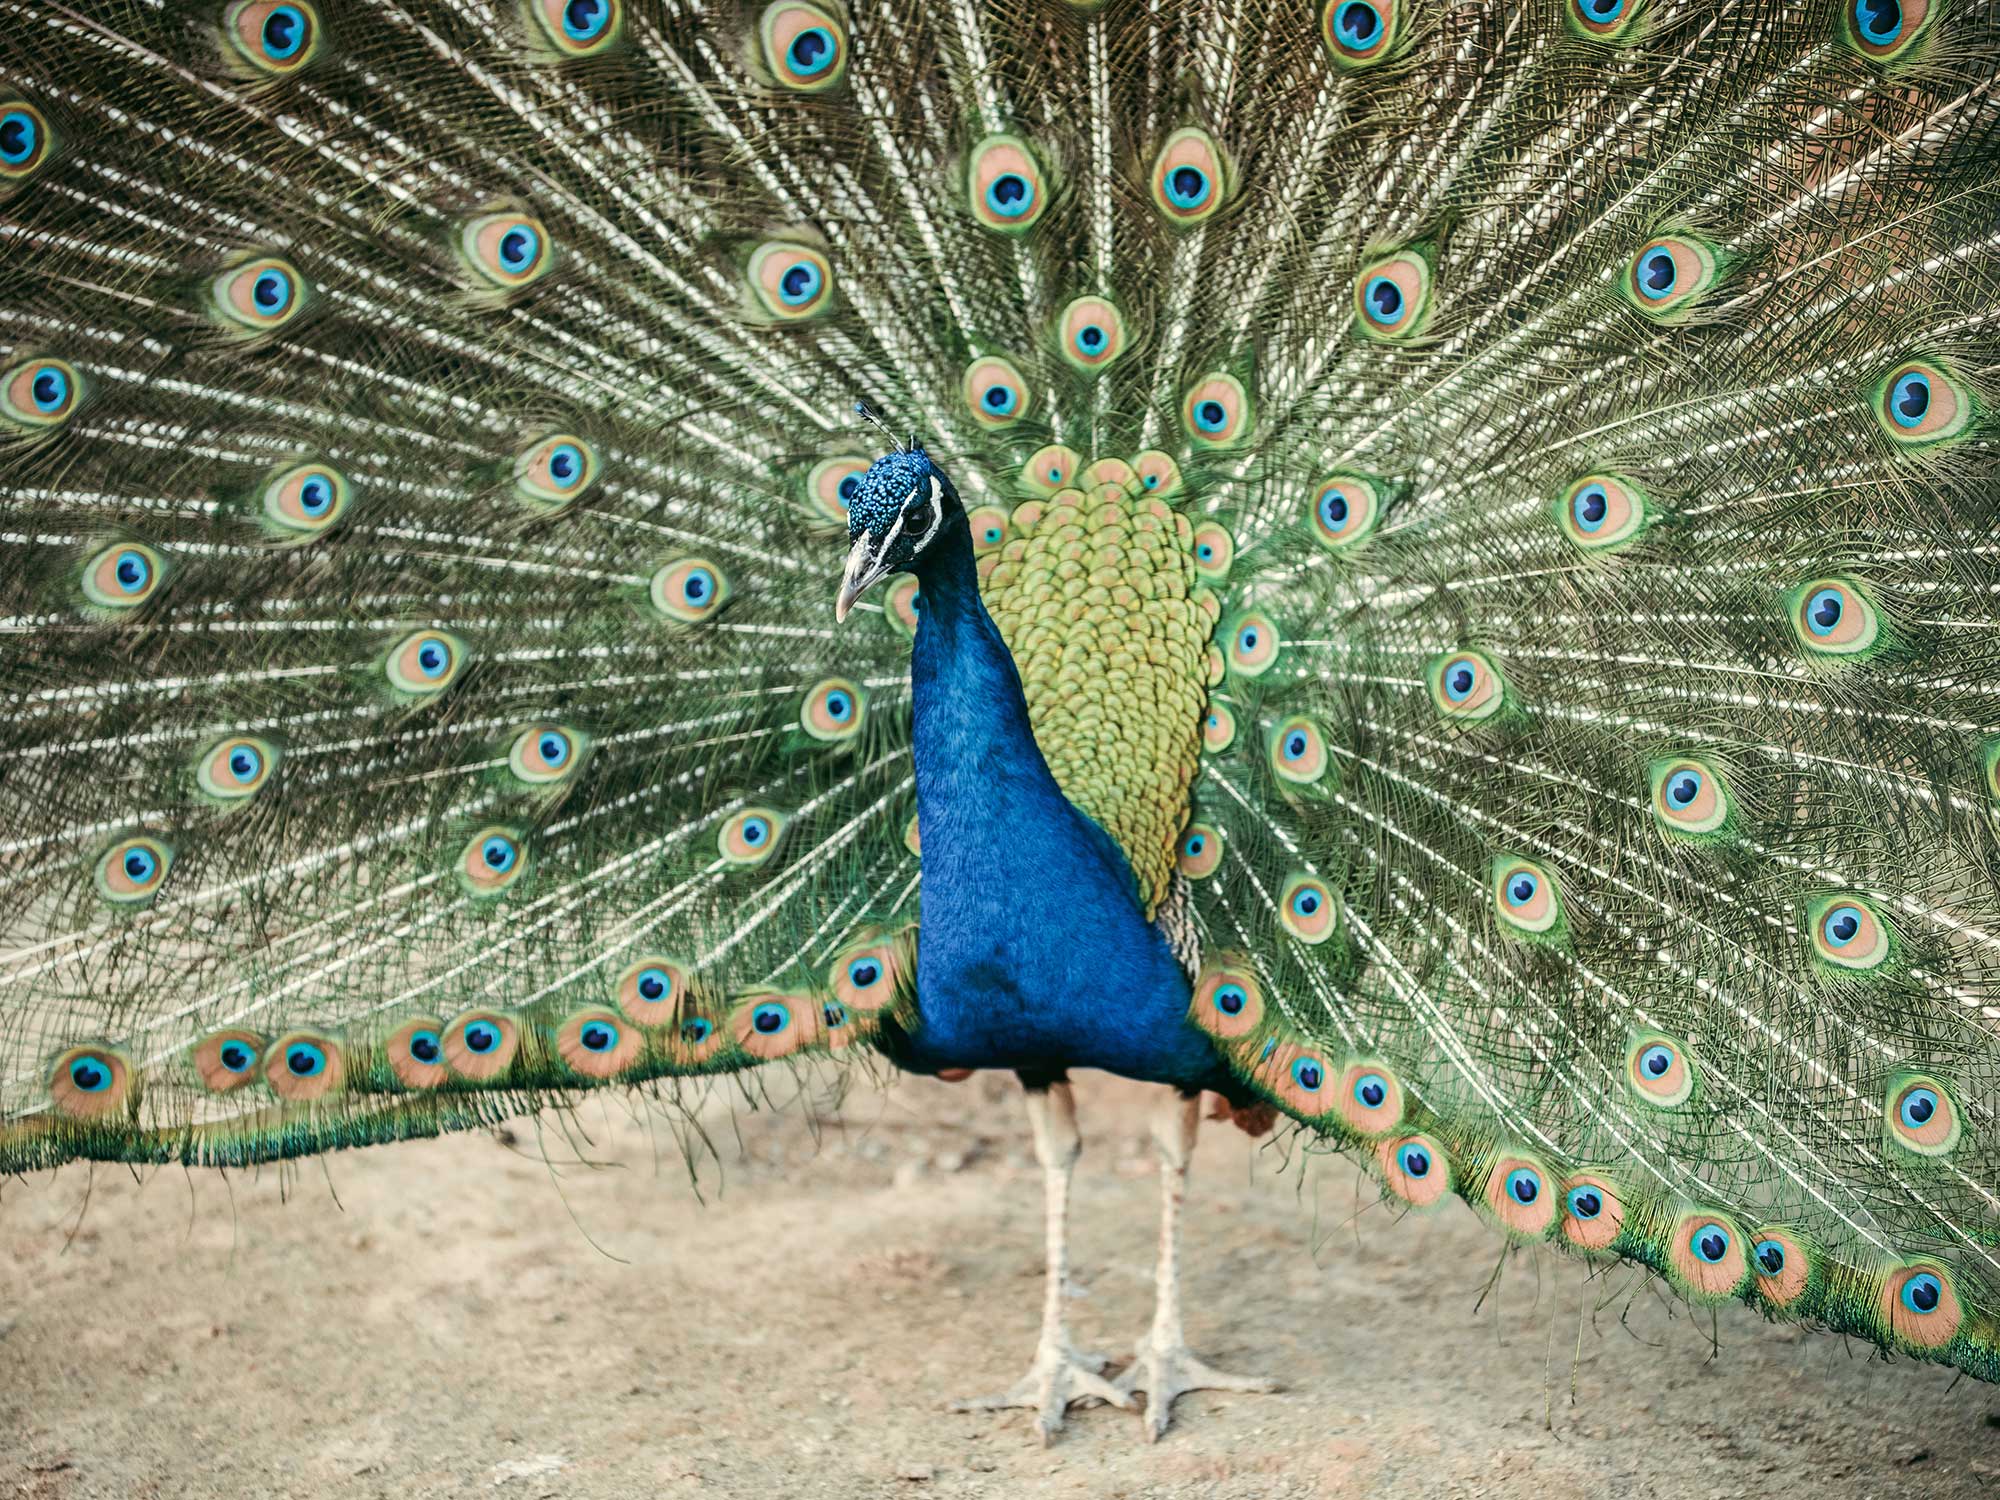 Male Peacocks Try To Attract Females While Already Bonking Other Females